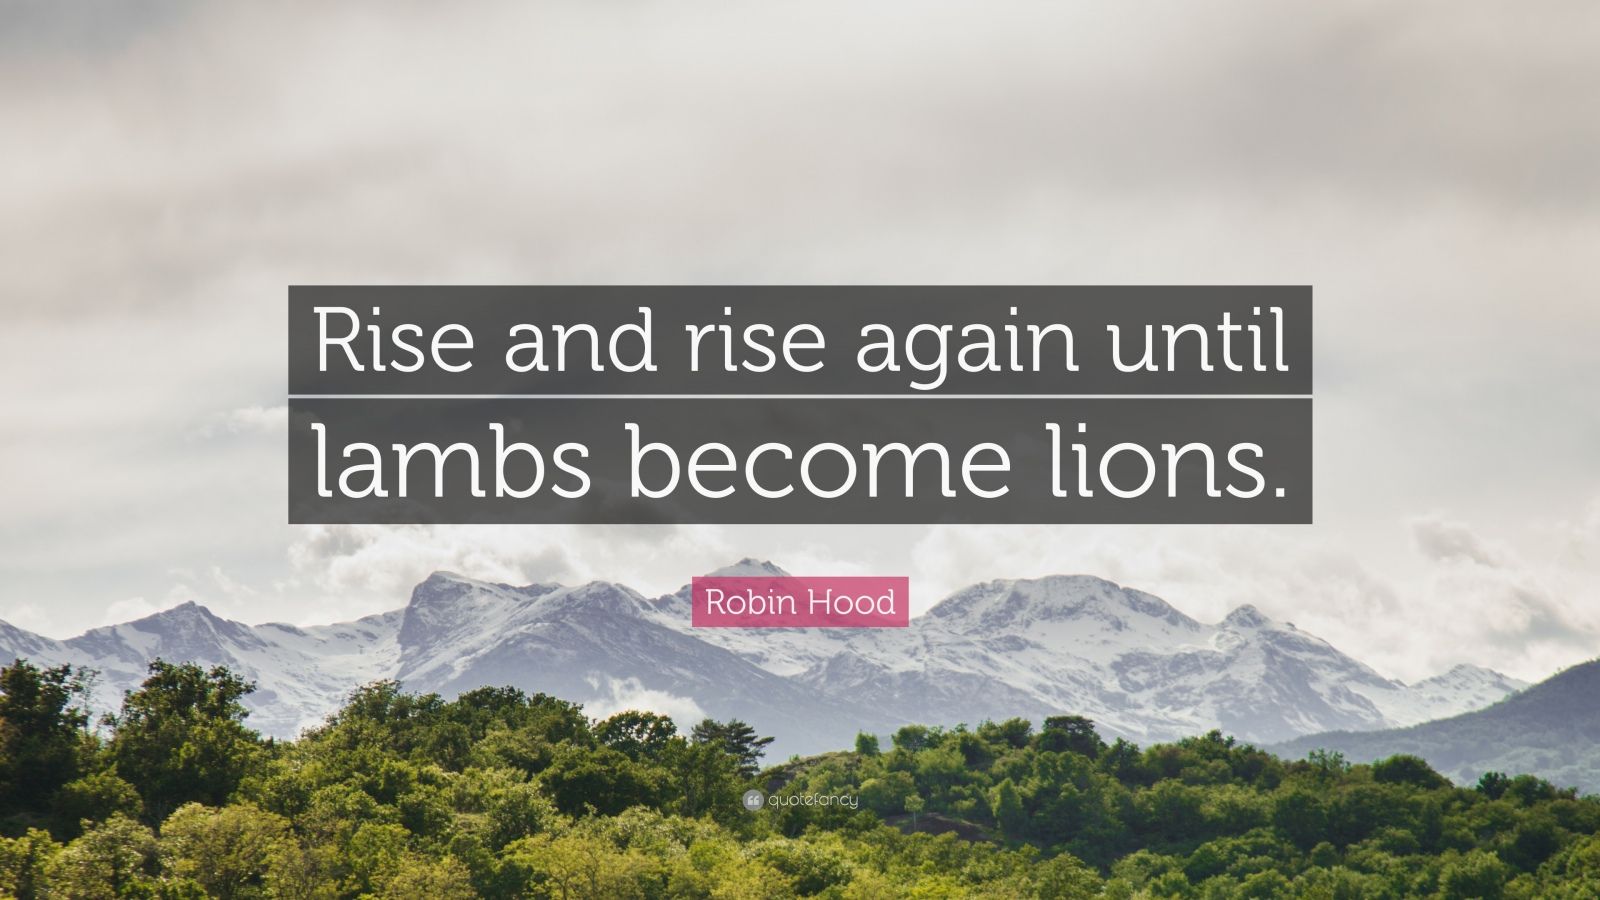 ROBIN KIDRise and rise again until lambs become lions